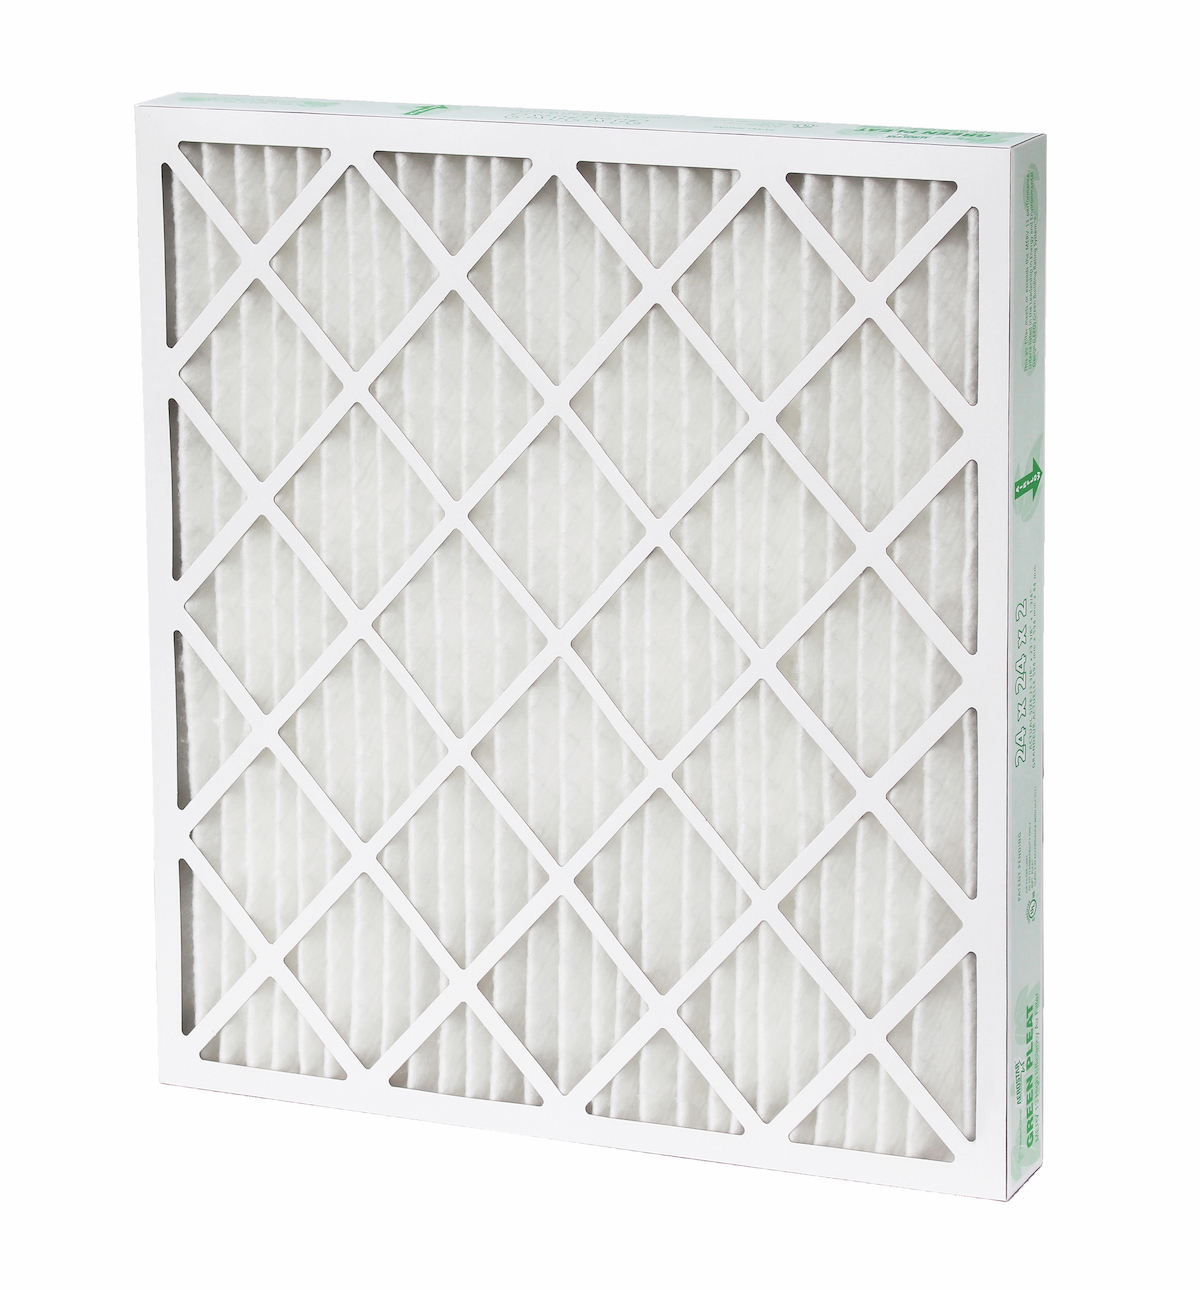 Green Pleat Filtration Group filtration guide